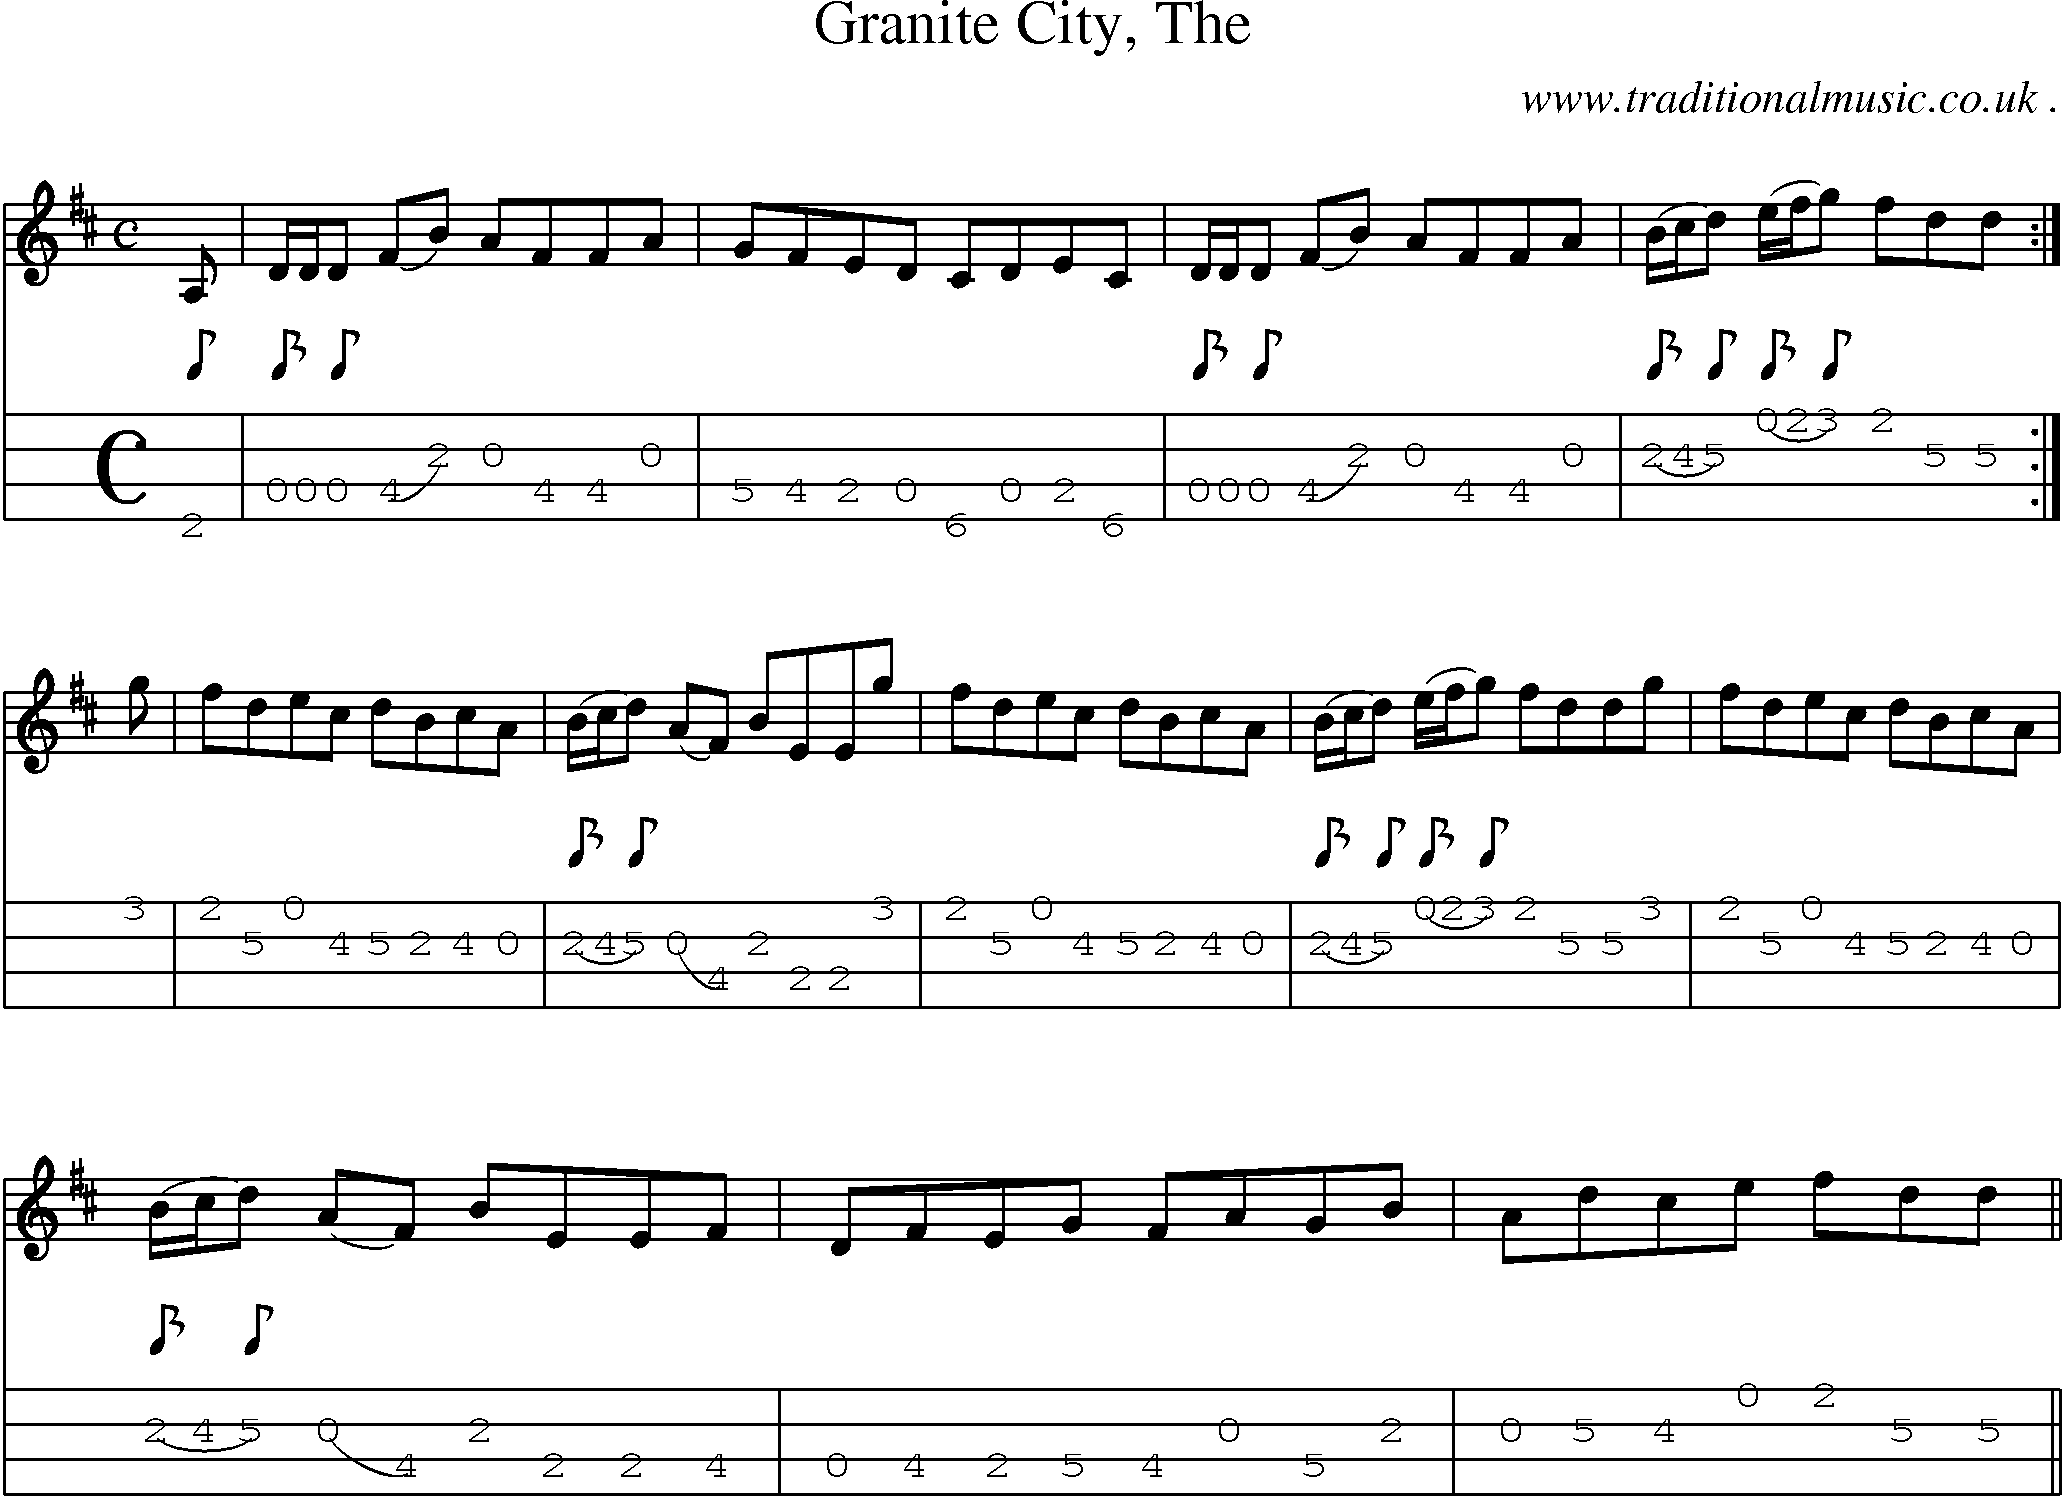 Sheet-music  score, Chords and Mandolin Tabs for Granite City The